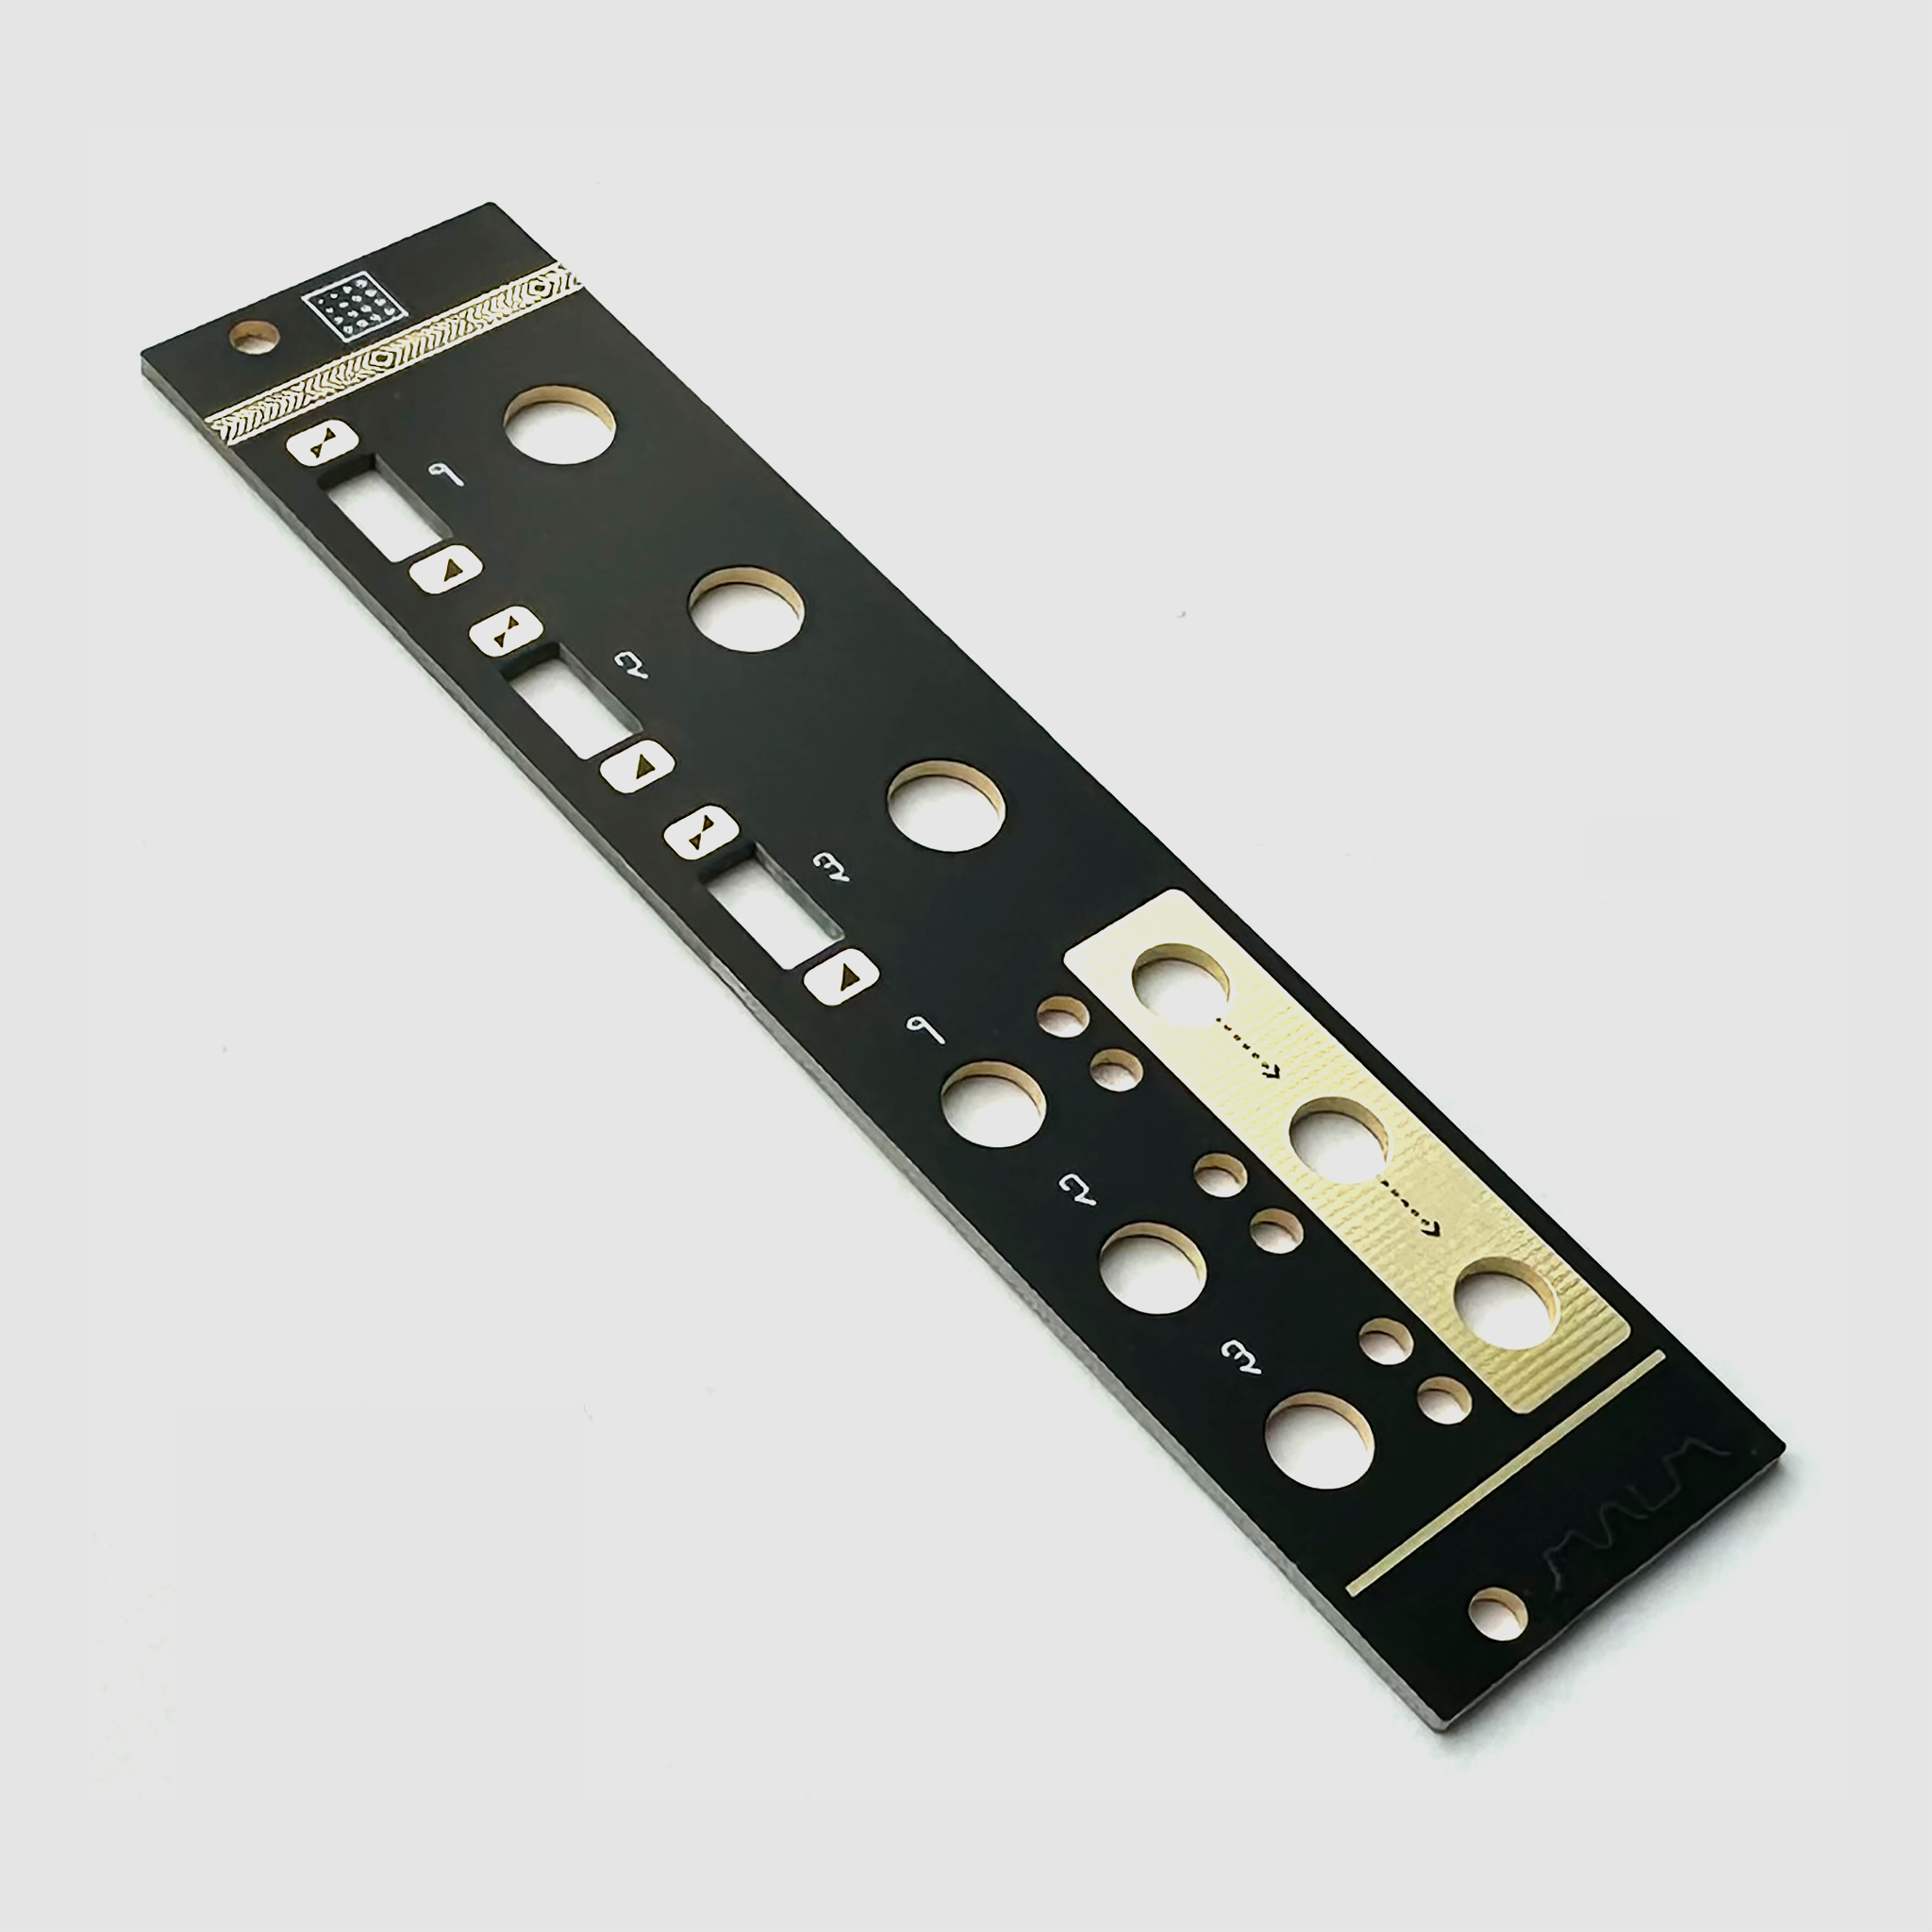 Black panel for Mutable Instruments Shades 2